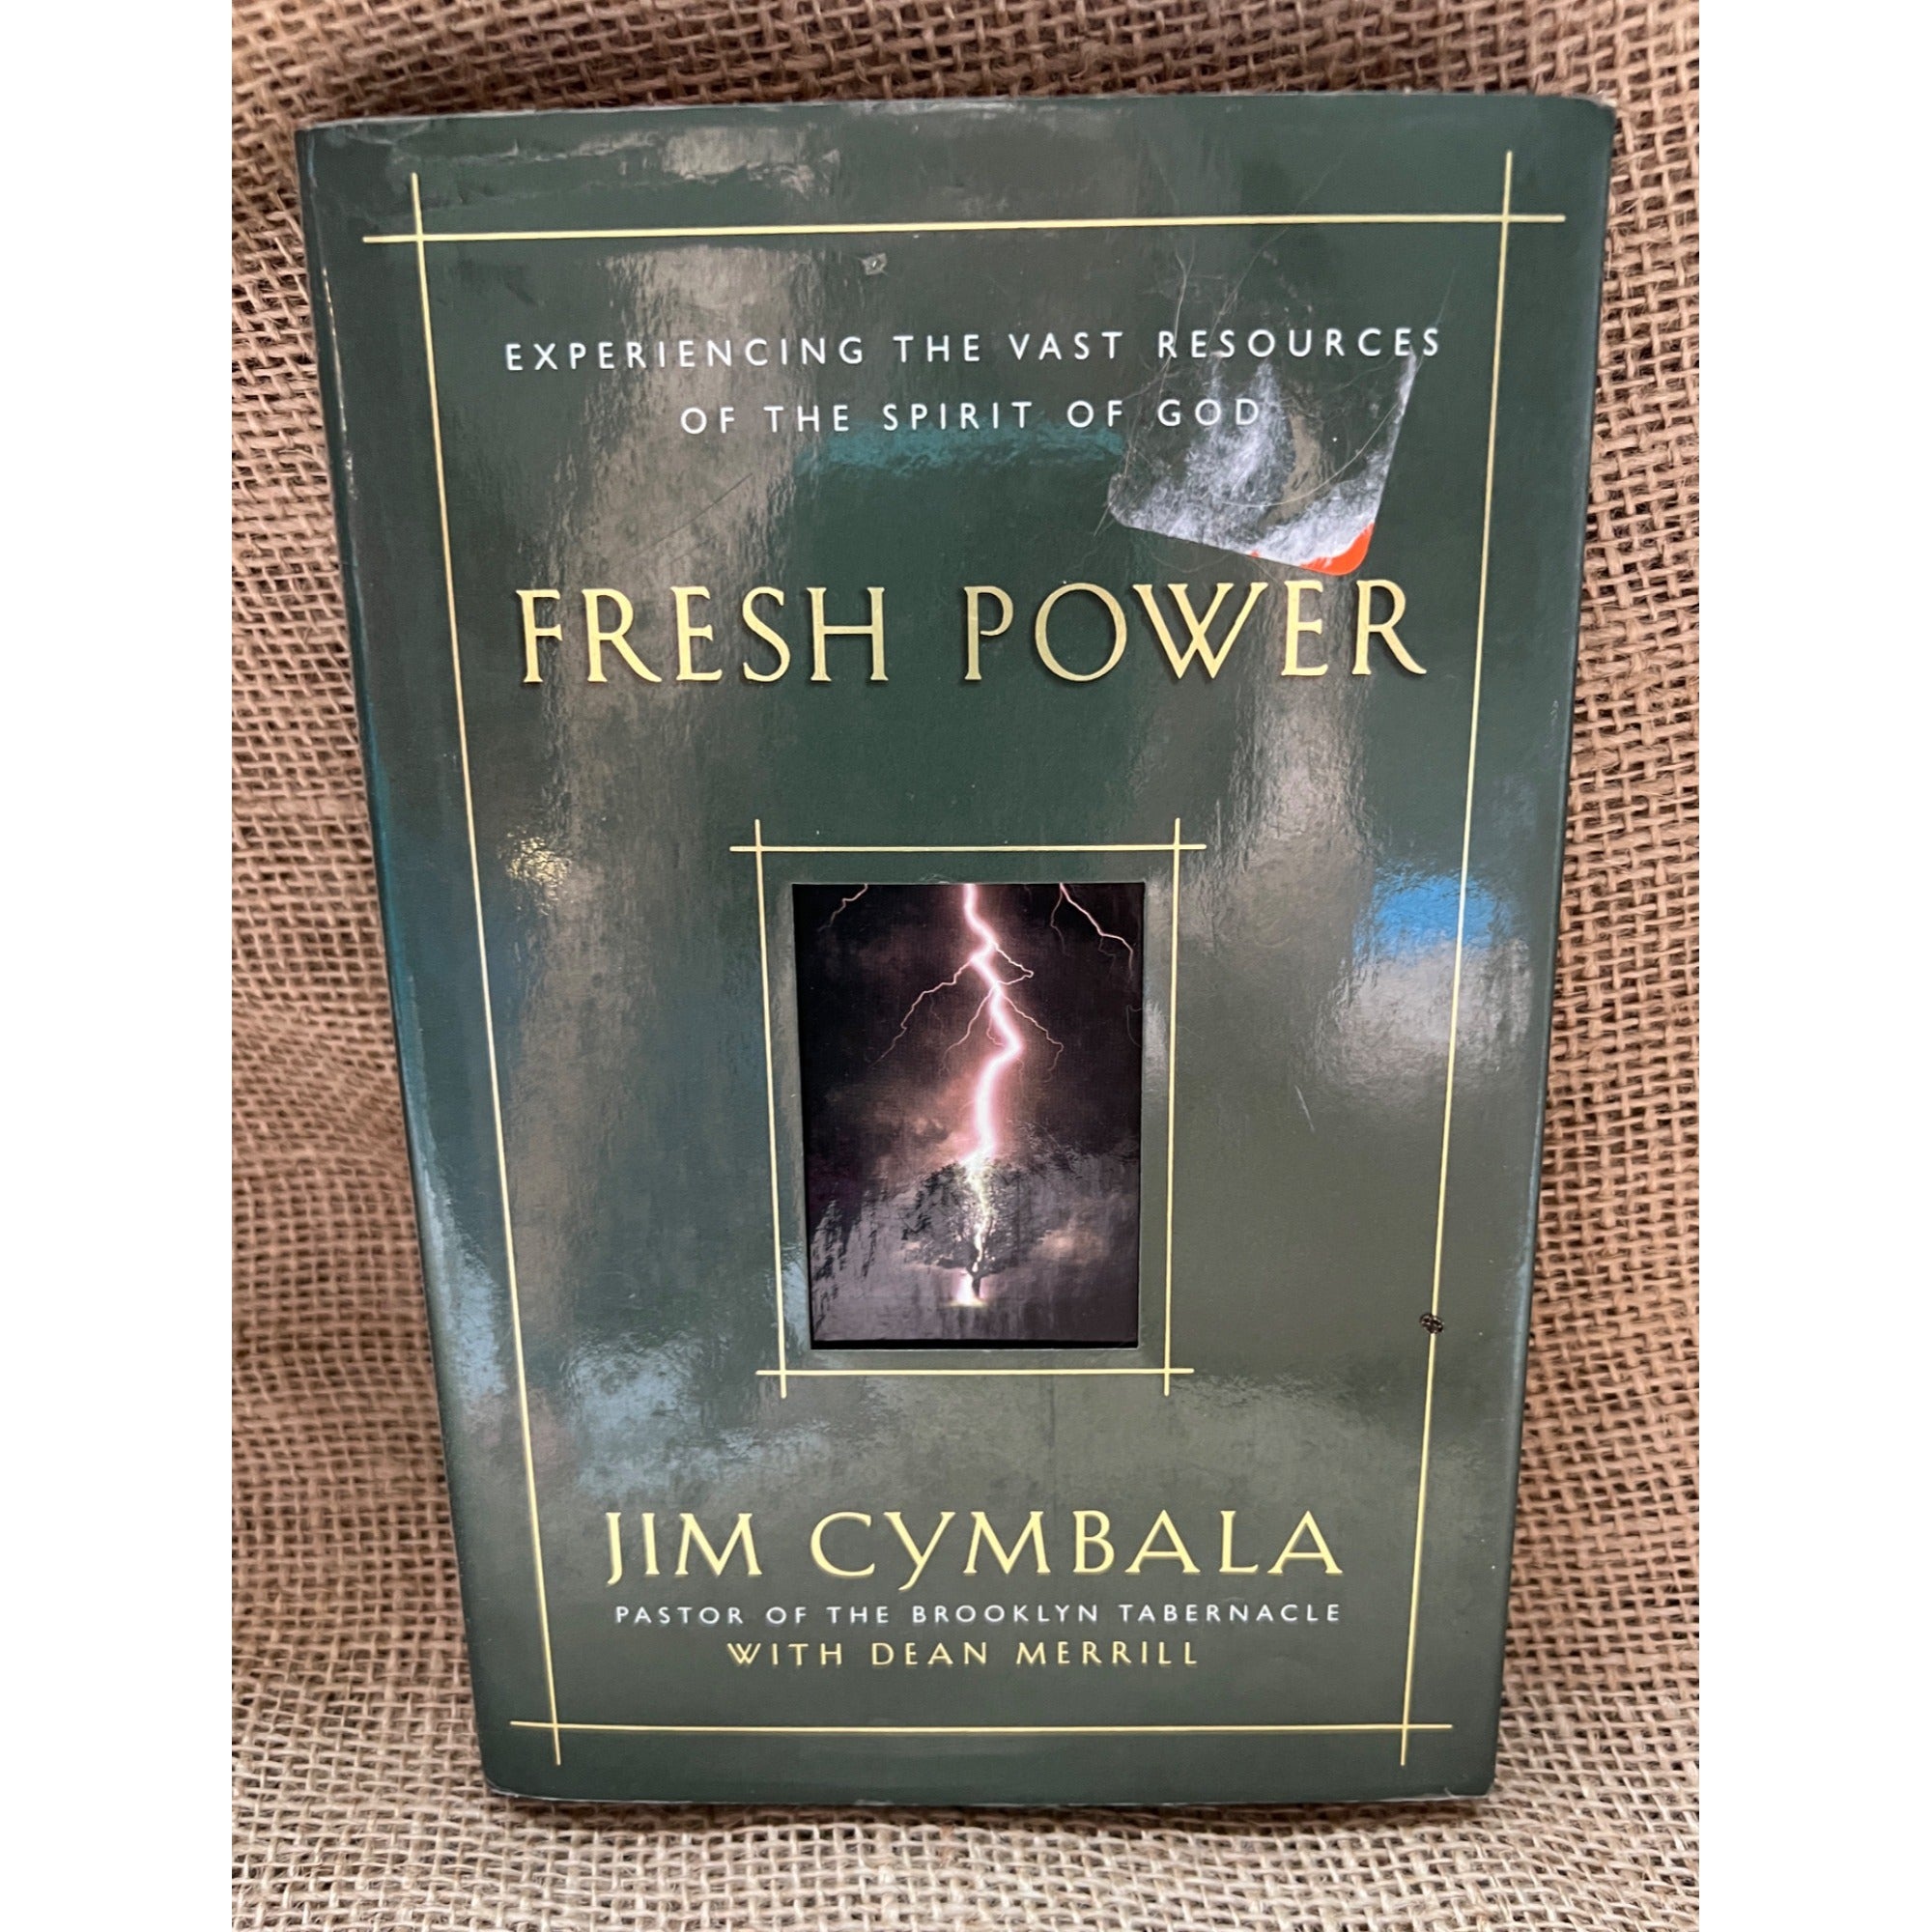 Fresh Power by Jim Cymbala, Hardback, Experiencing the Vast Resources of the Spirit of God